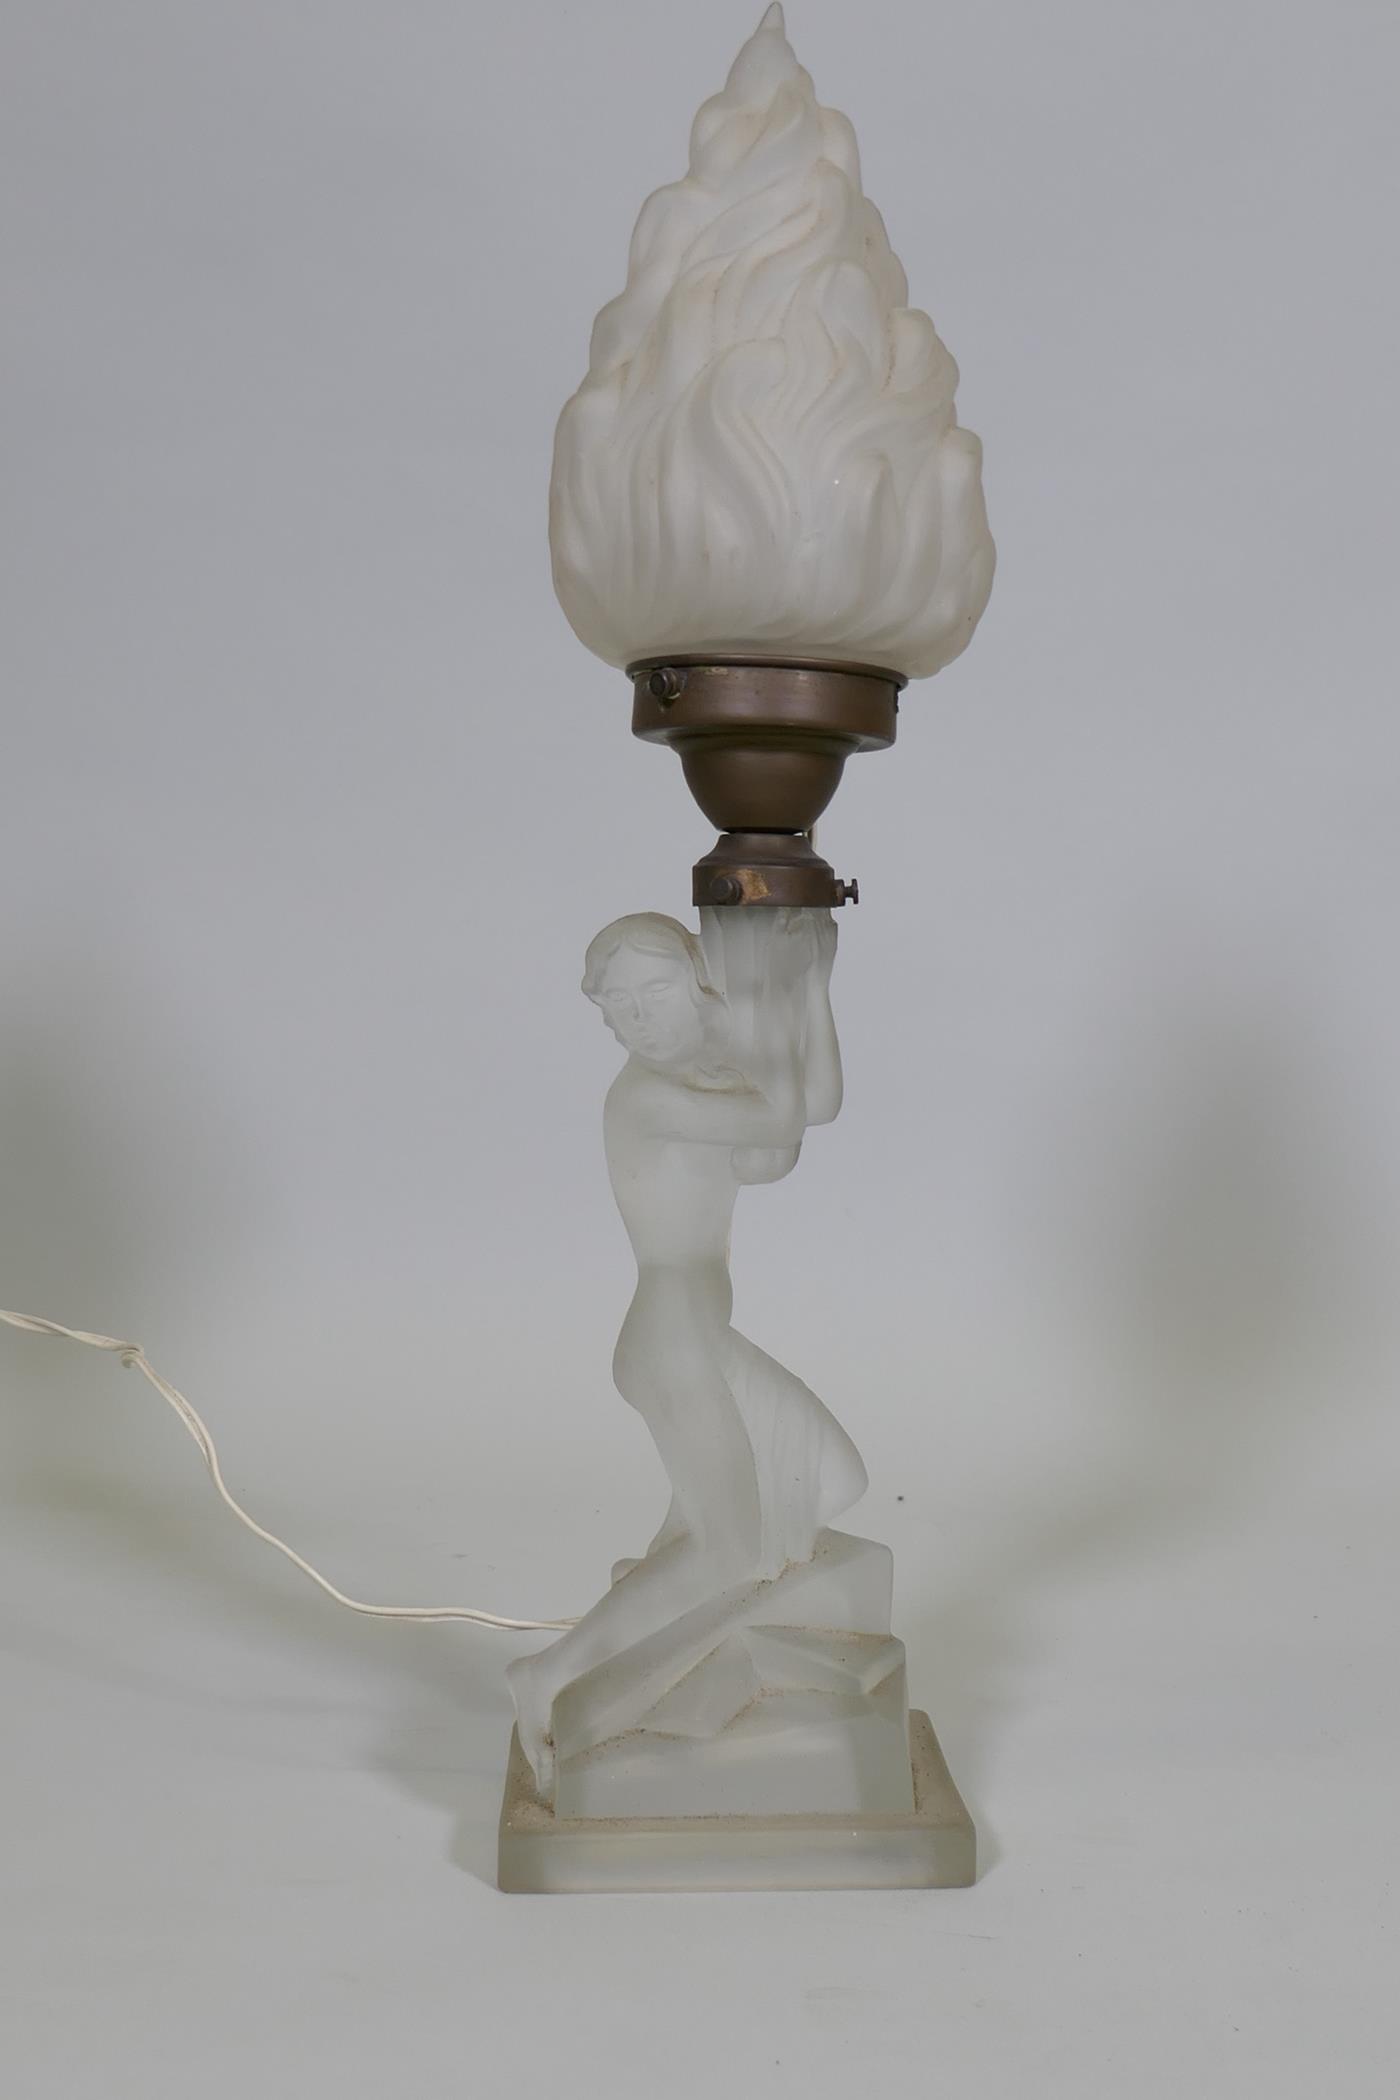 An Art Deco period glass table lamp, 16" high - Image 2 of 4